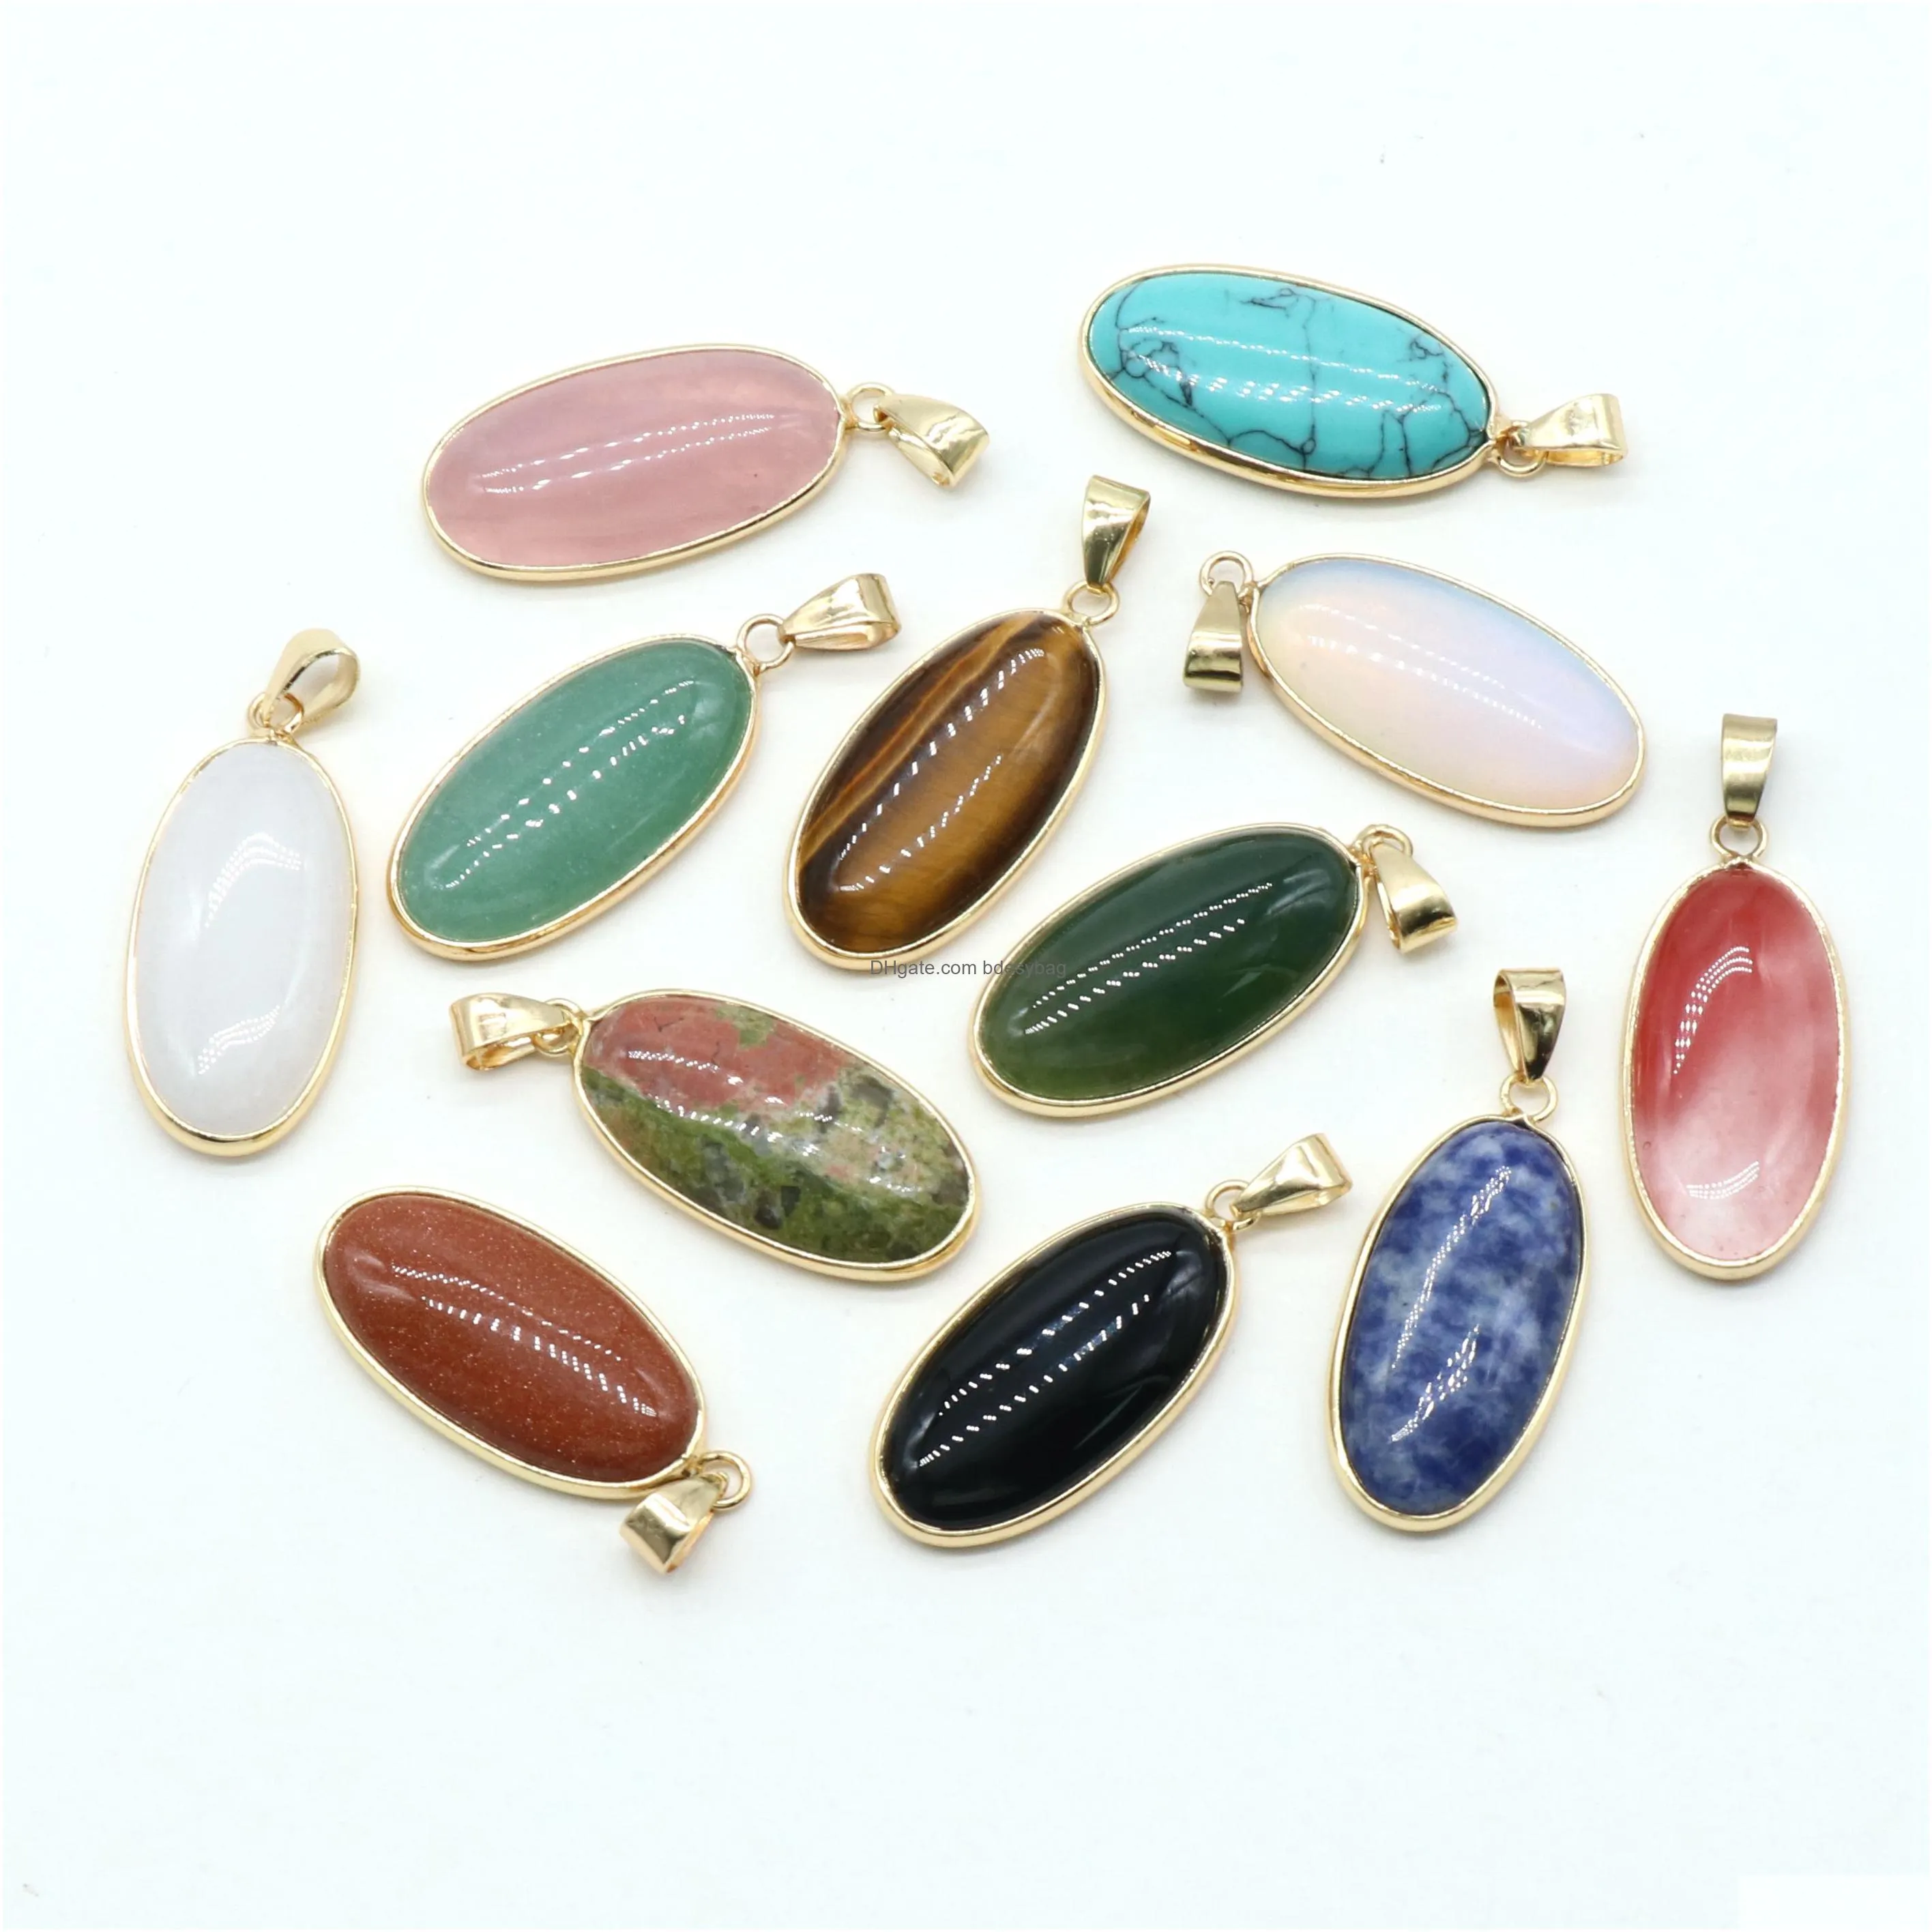 natural stone pendants waterdrop shape mixed stone agate green aventurine chakra healing stones charms for jewelry making necklace